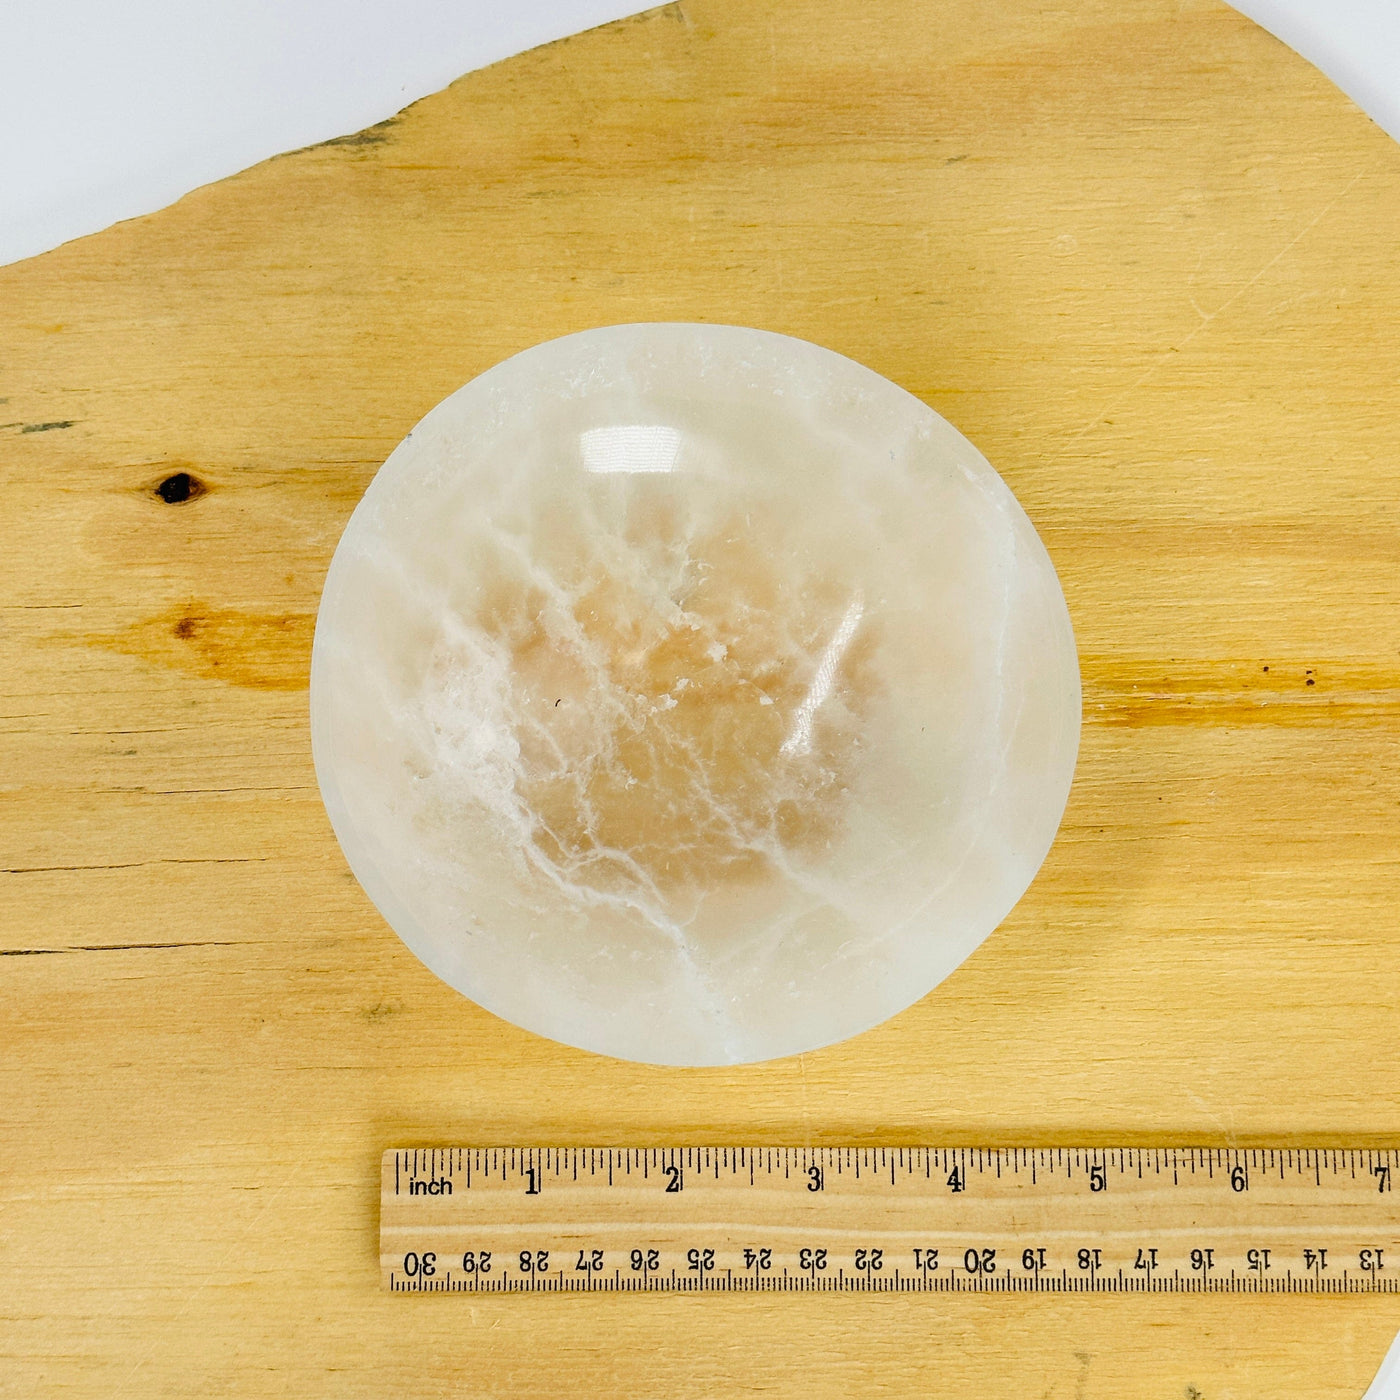 selenite round bowl next to a ruler for size reference